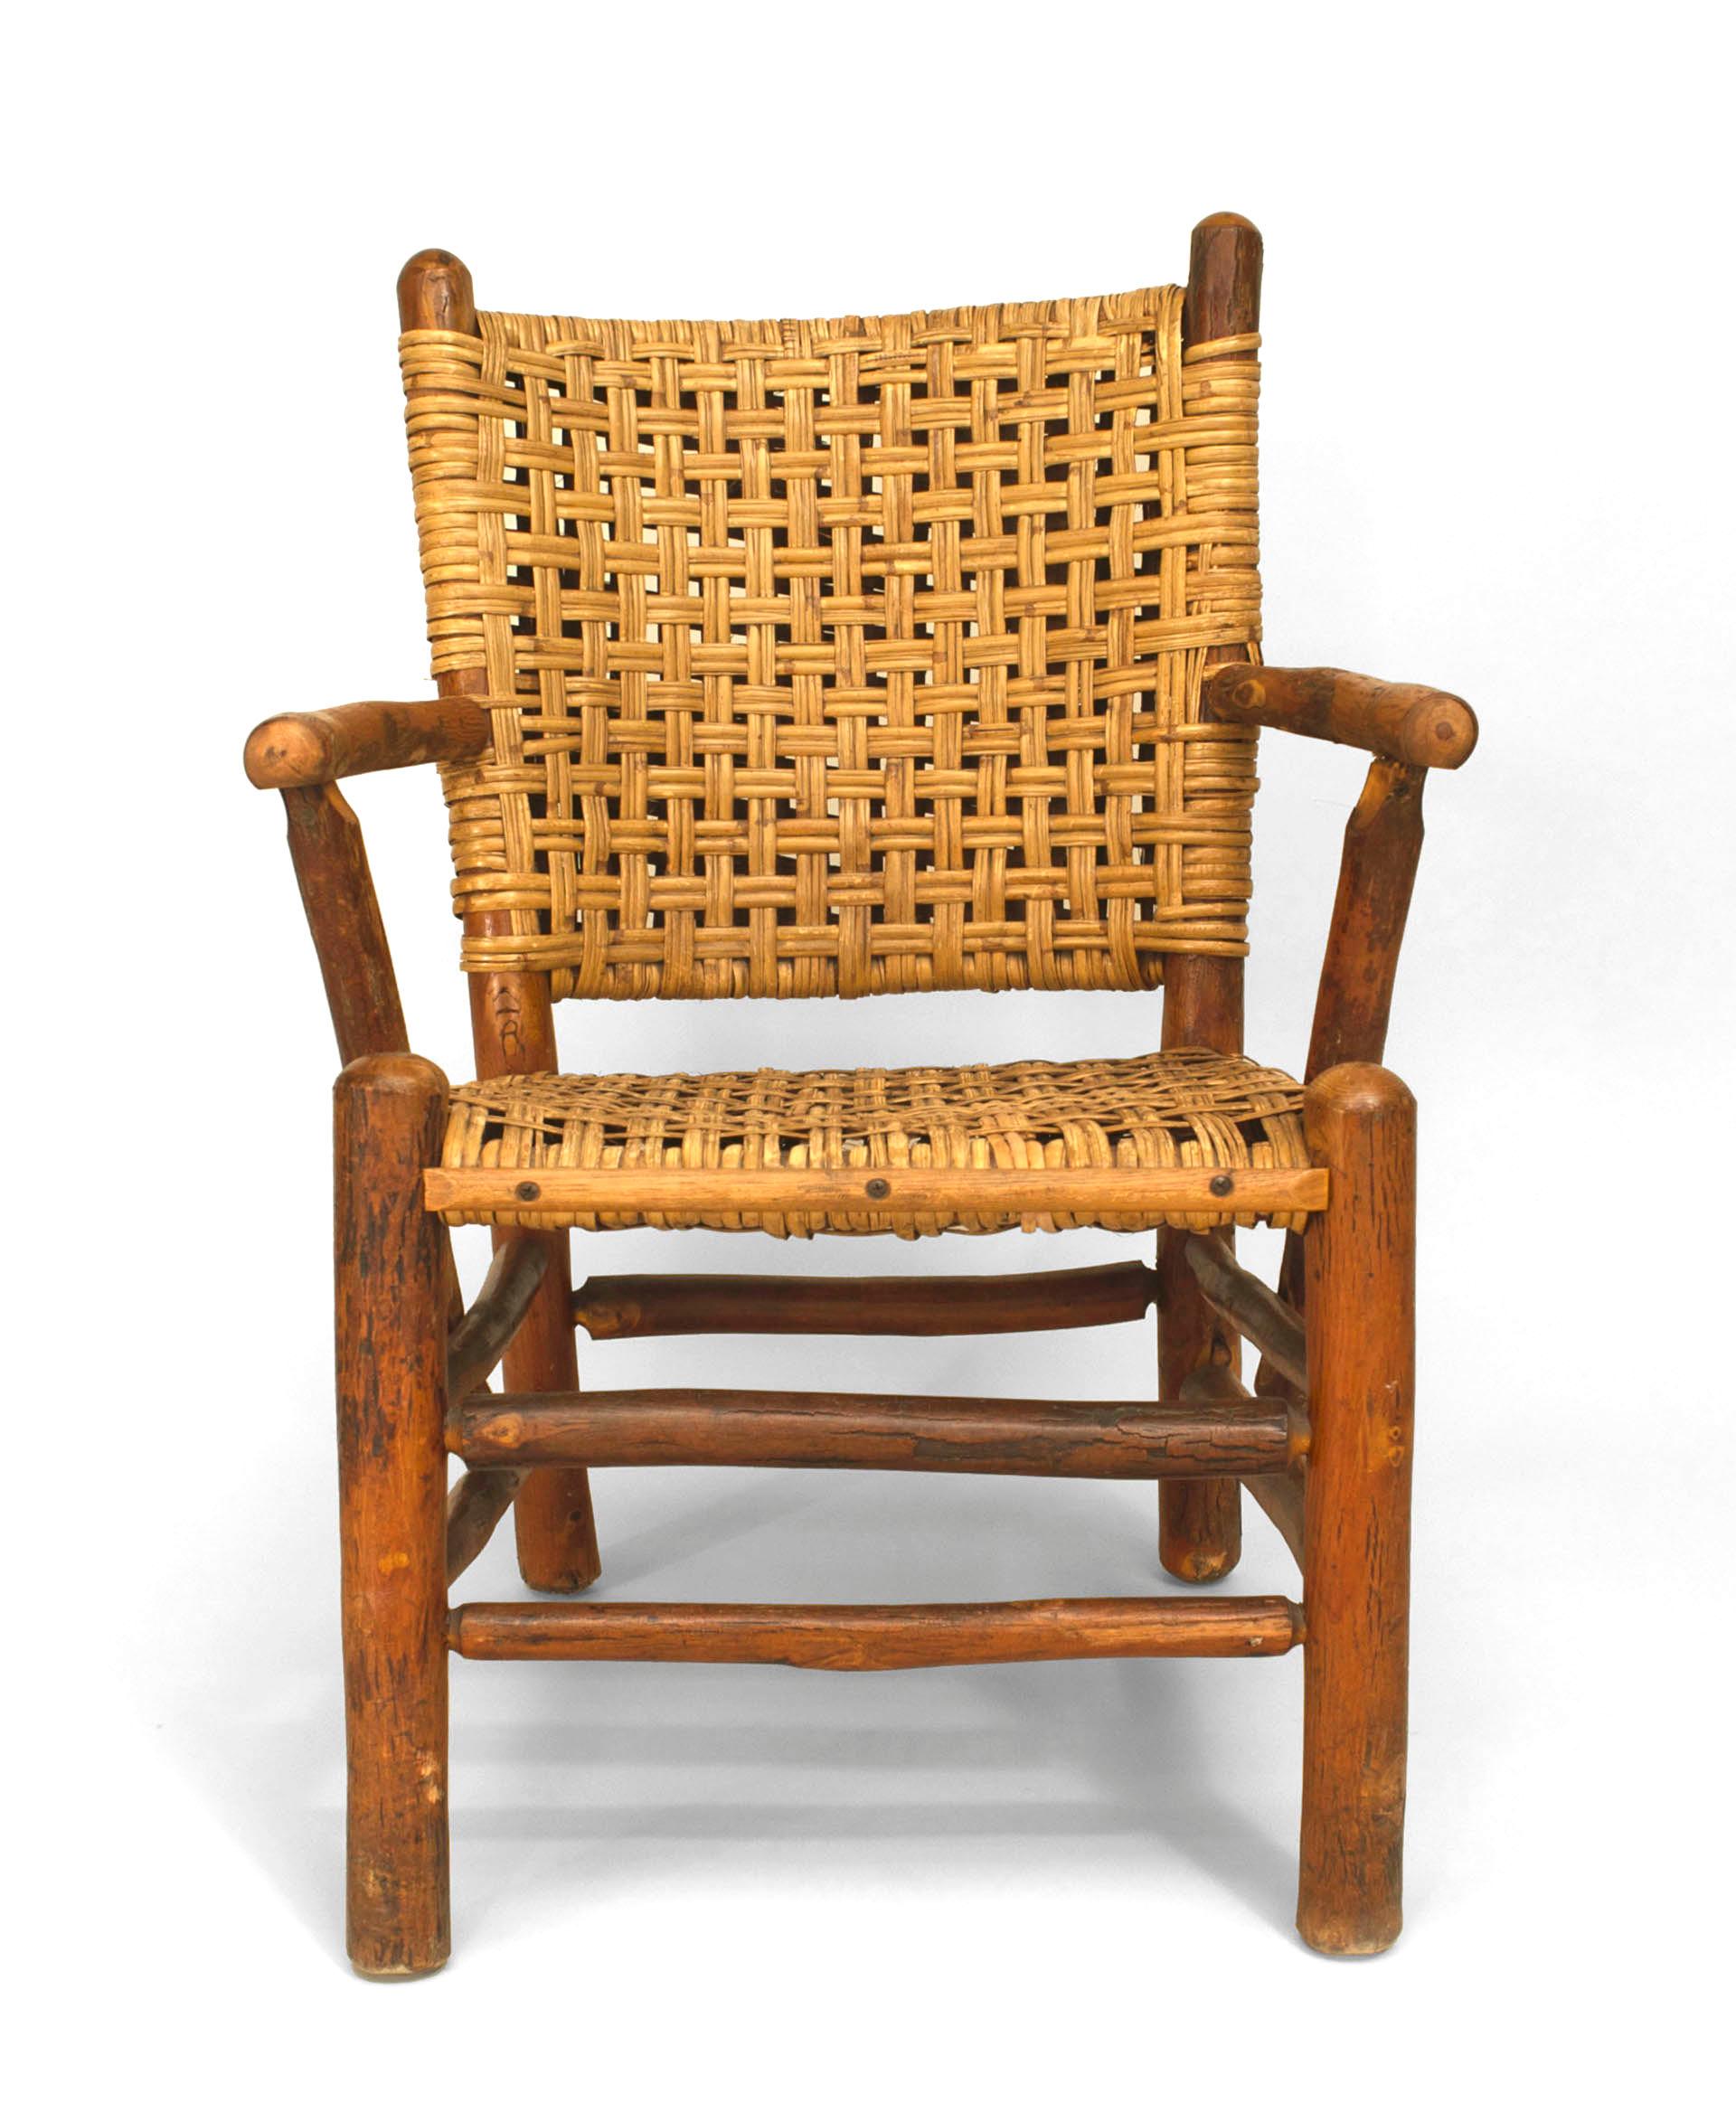 Branded with the name of the Old Hickory Company of Martinsville, Indiana, this pair of rustic open armchairs features woven seats and backs above double box stretchers.